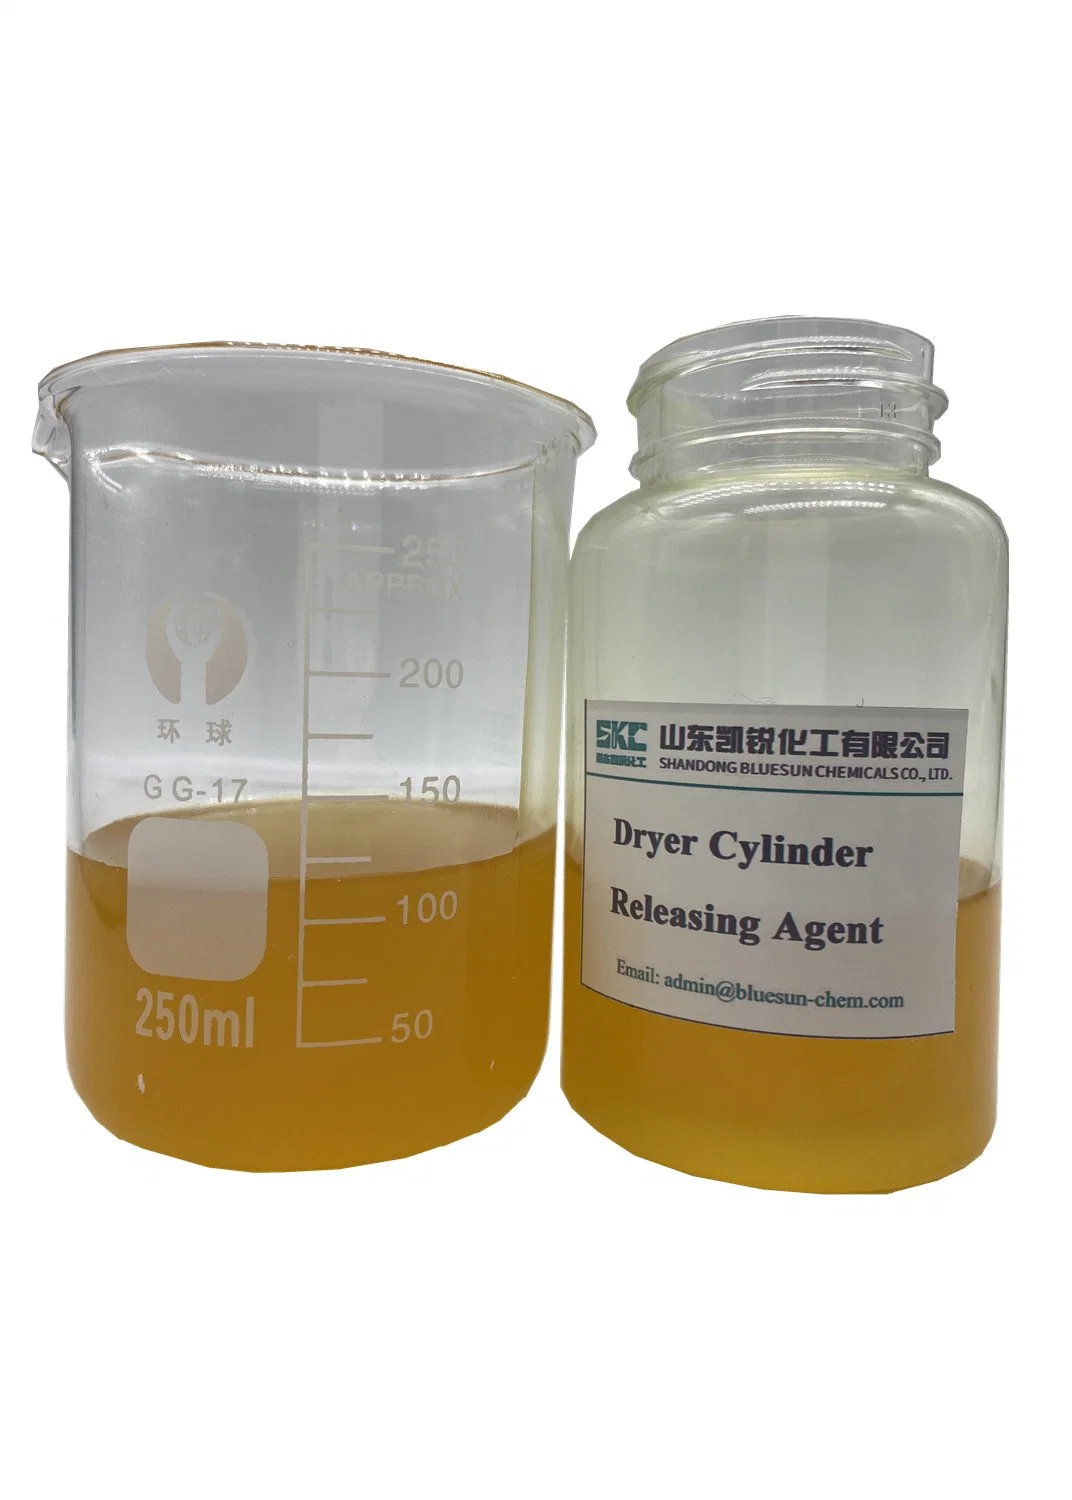 Yankee Cylinder Chemicals Dryer Release Agent for Corrugated Paper